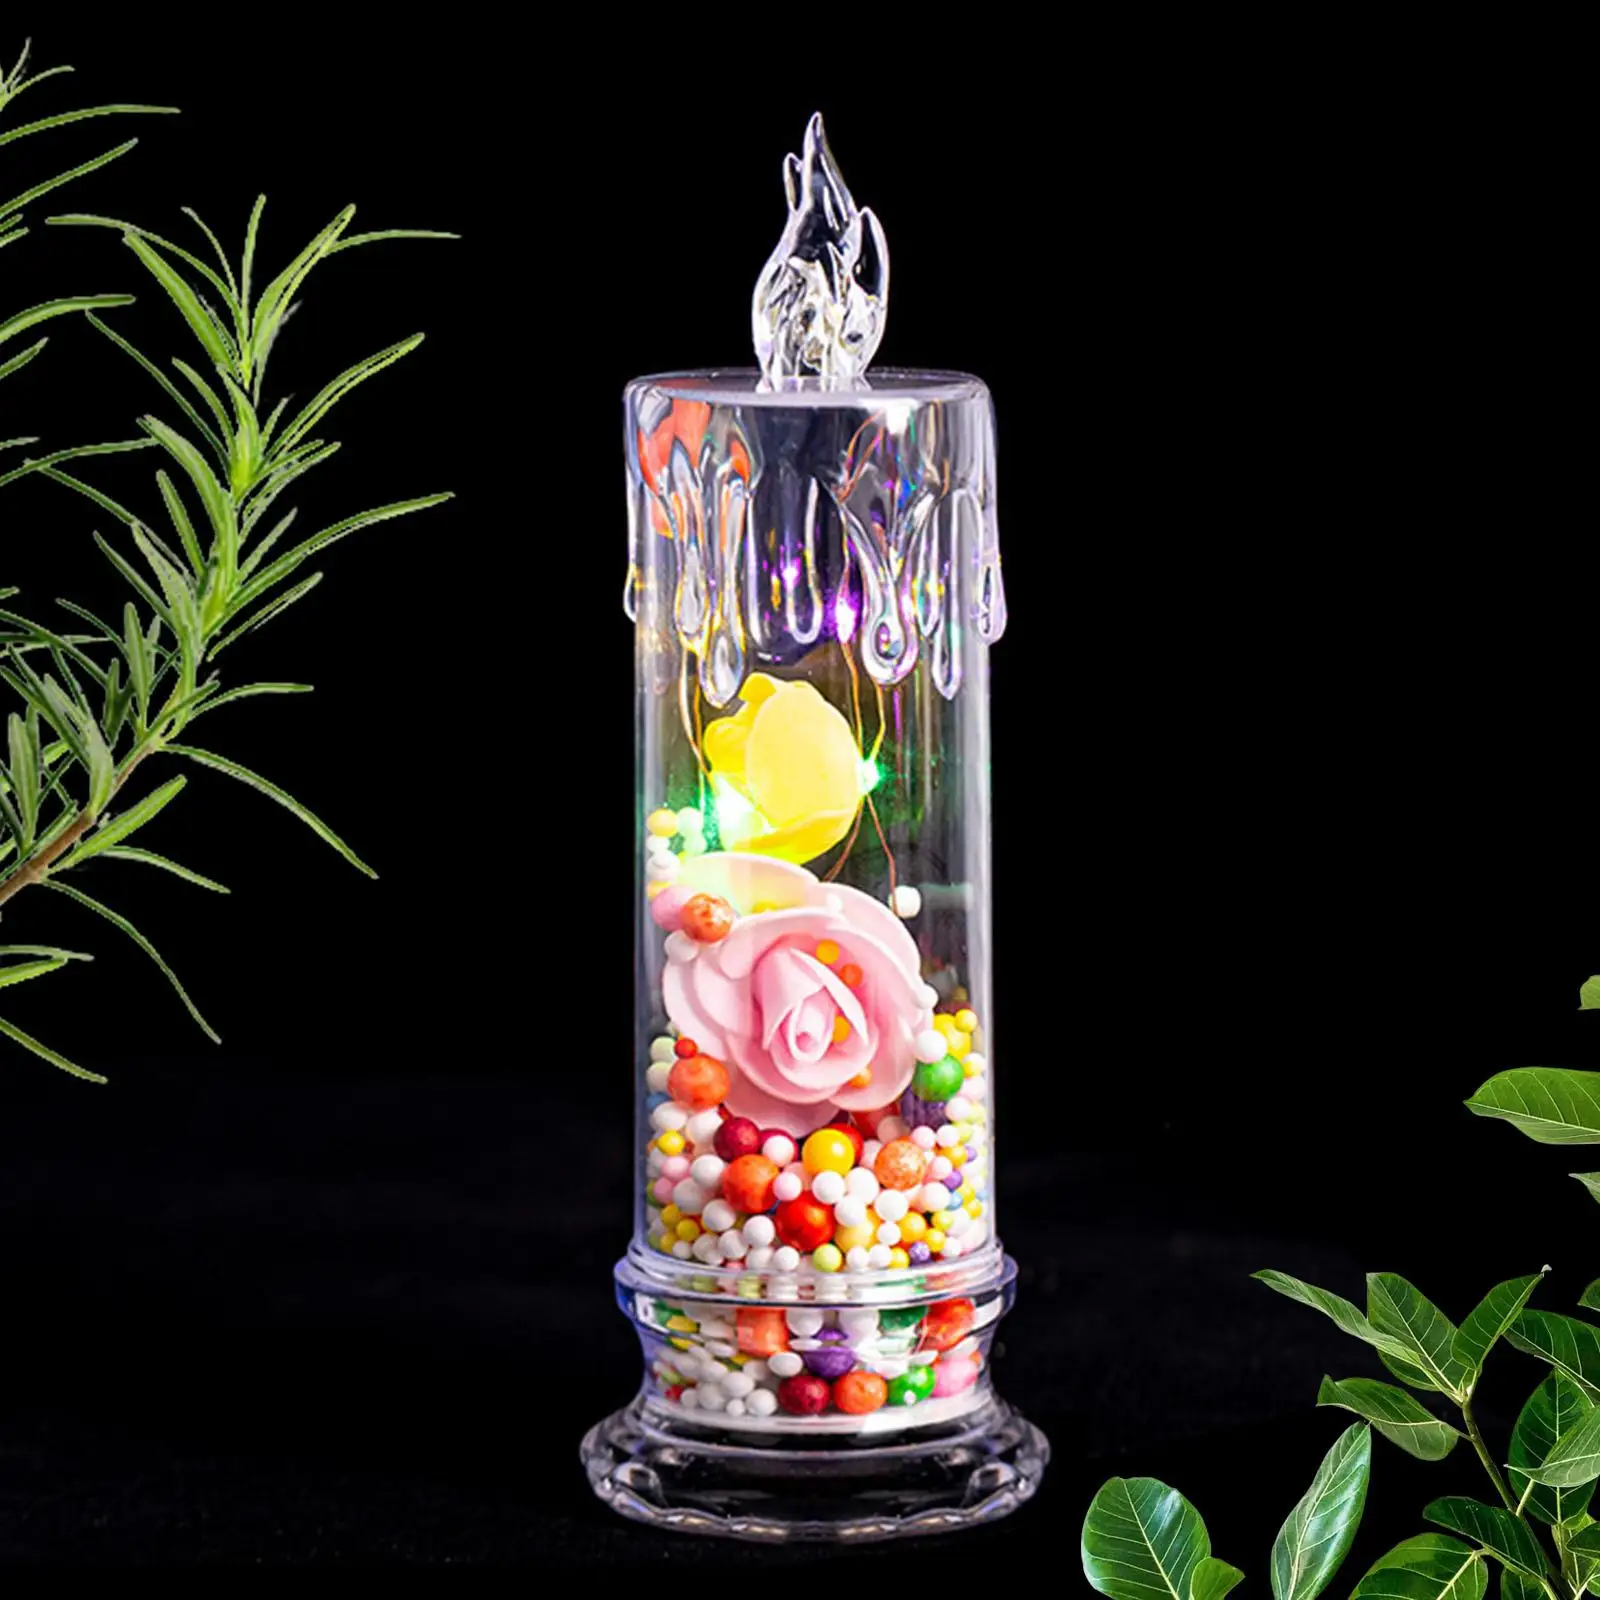 Preserved Rose Gifts with Colorful Lights Beautiful Preserved Rose in Dome Home Decor for Teachers Mom Grandma Couples Family